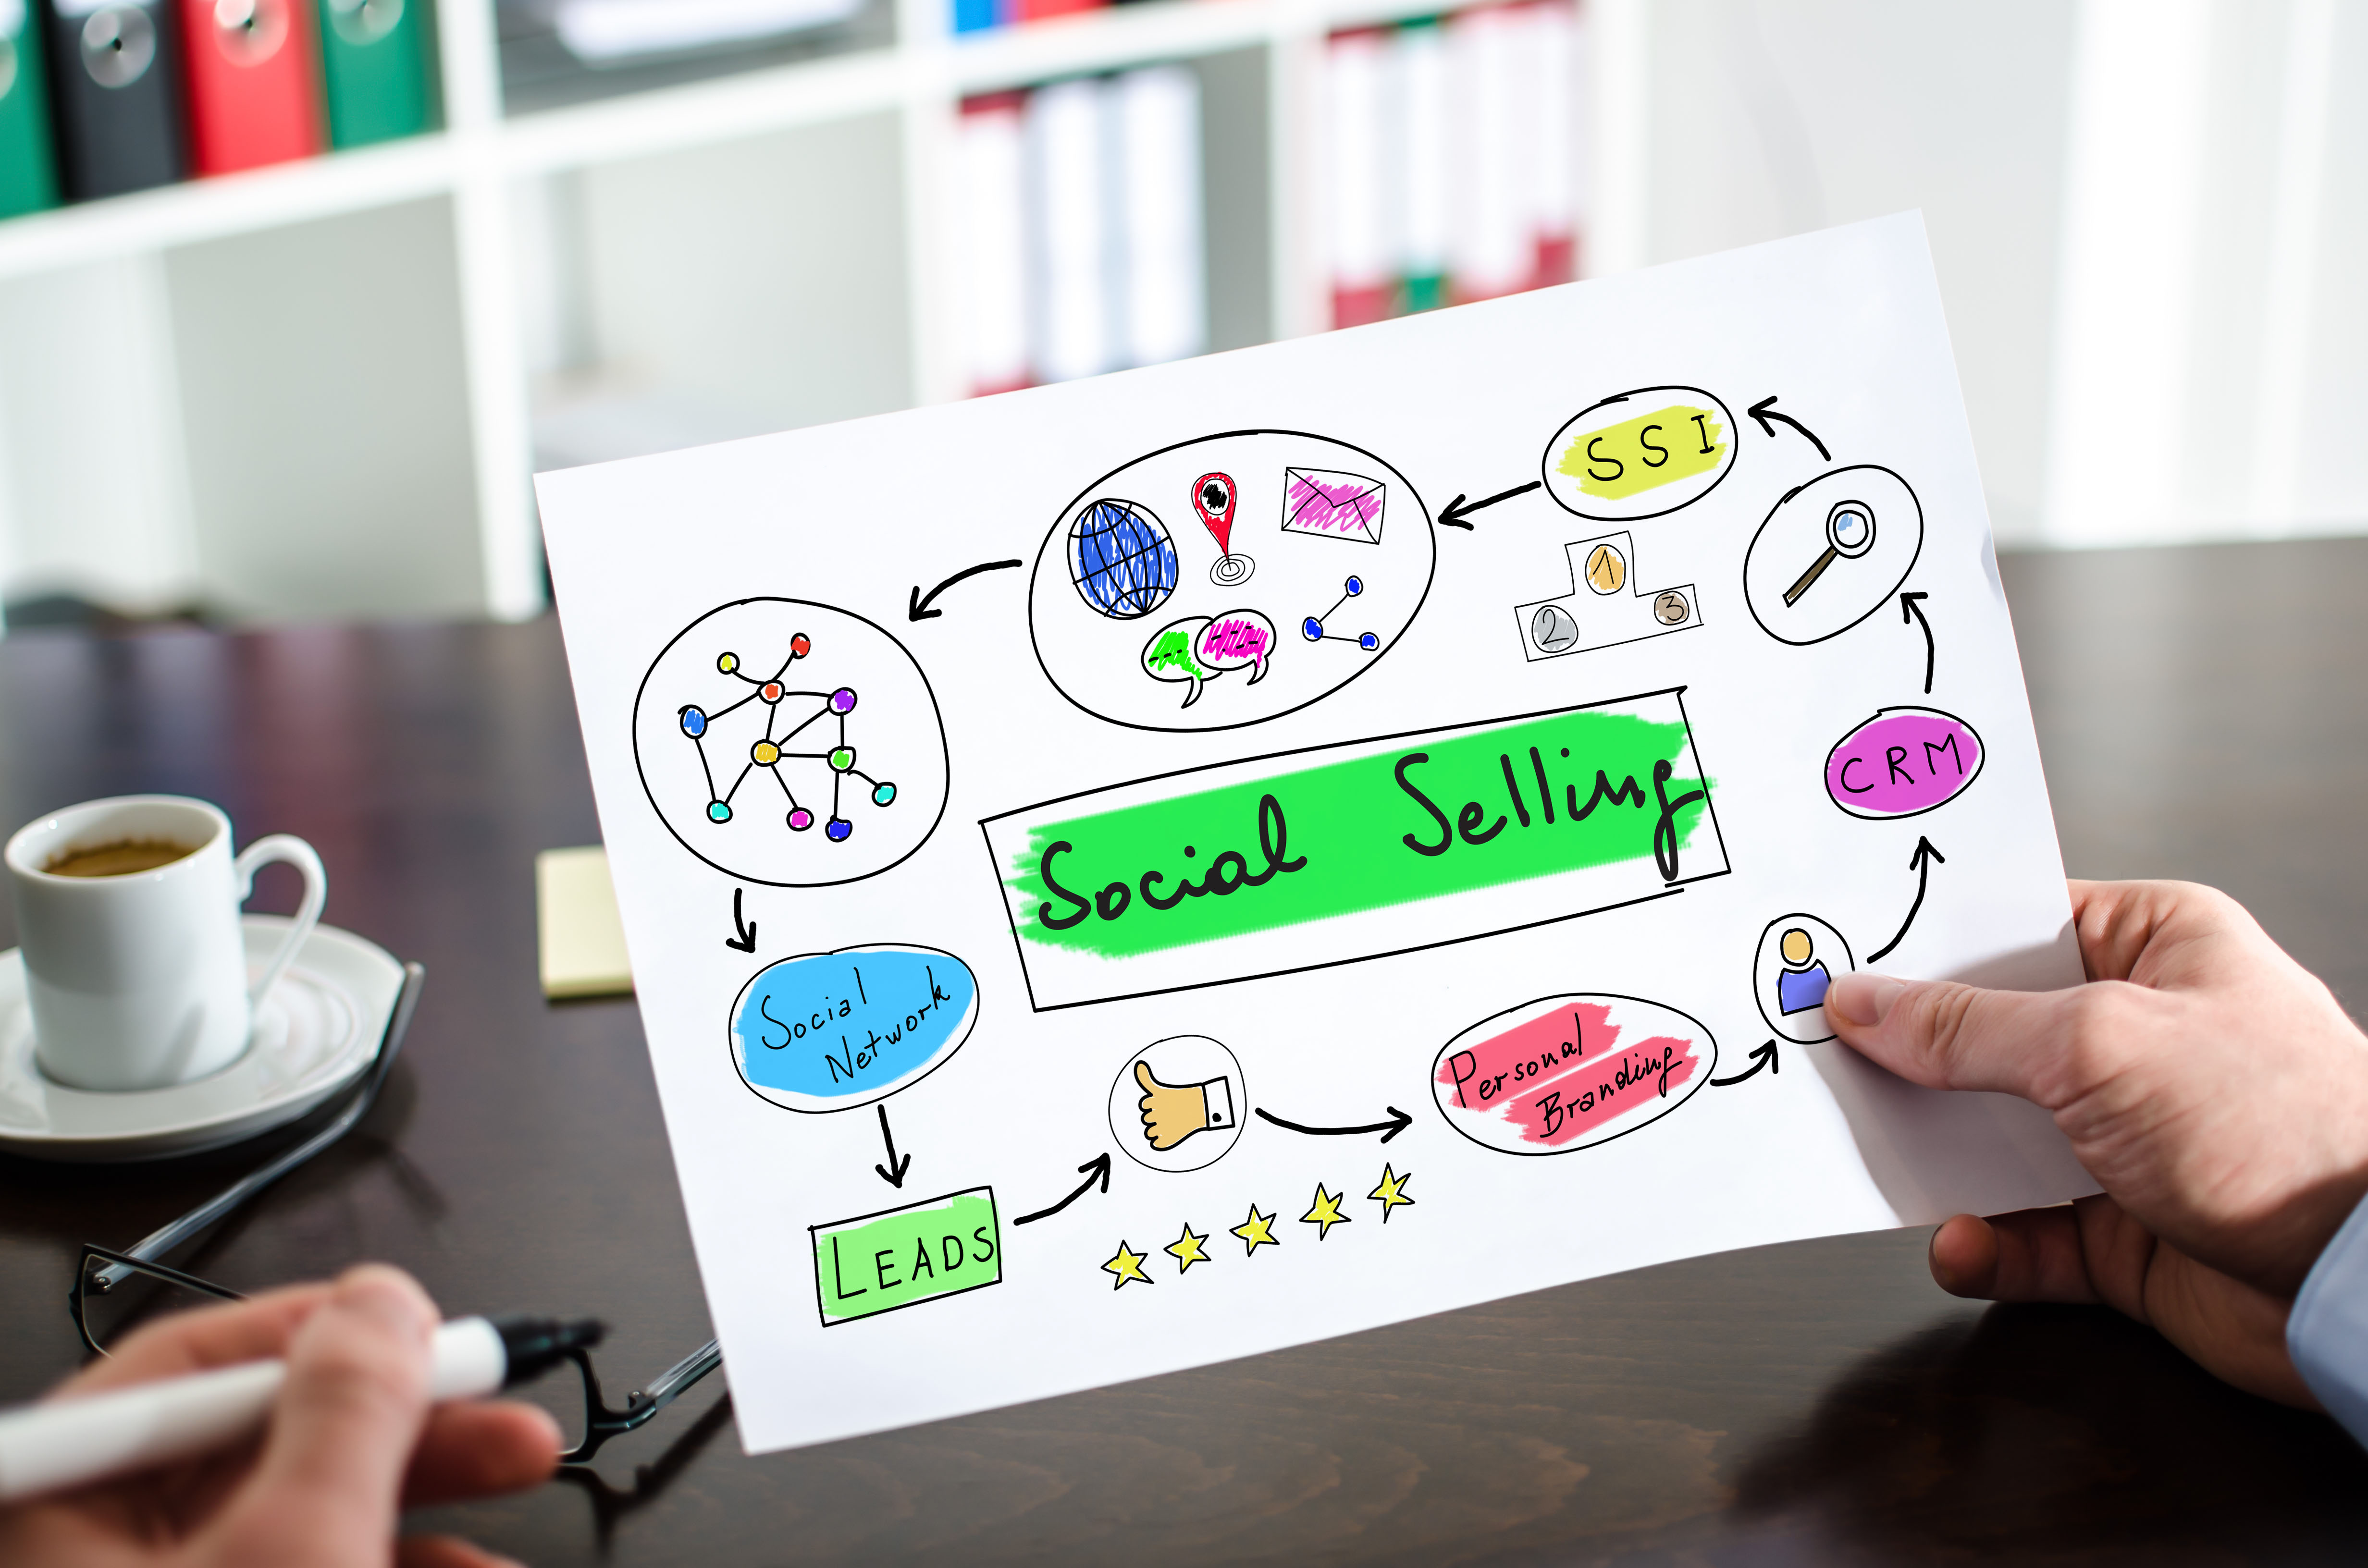 Social Selling: 4 Things You Need from Your Buyer Before You Can Sell to Them